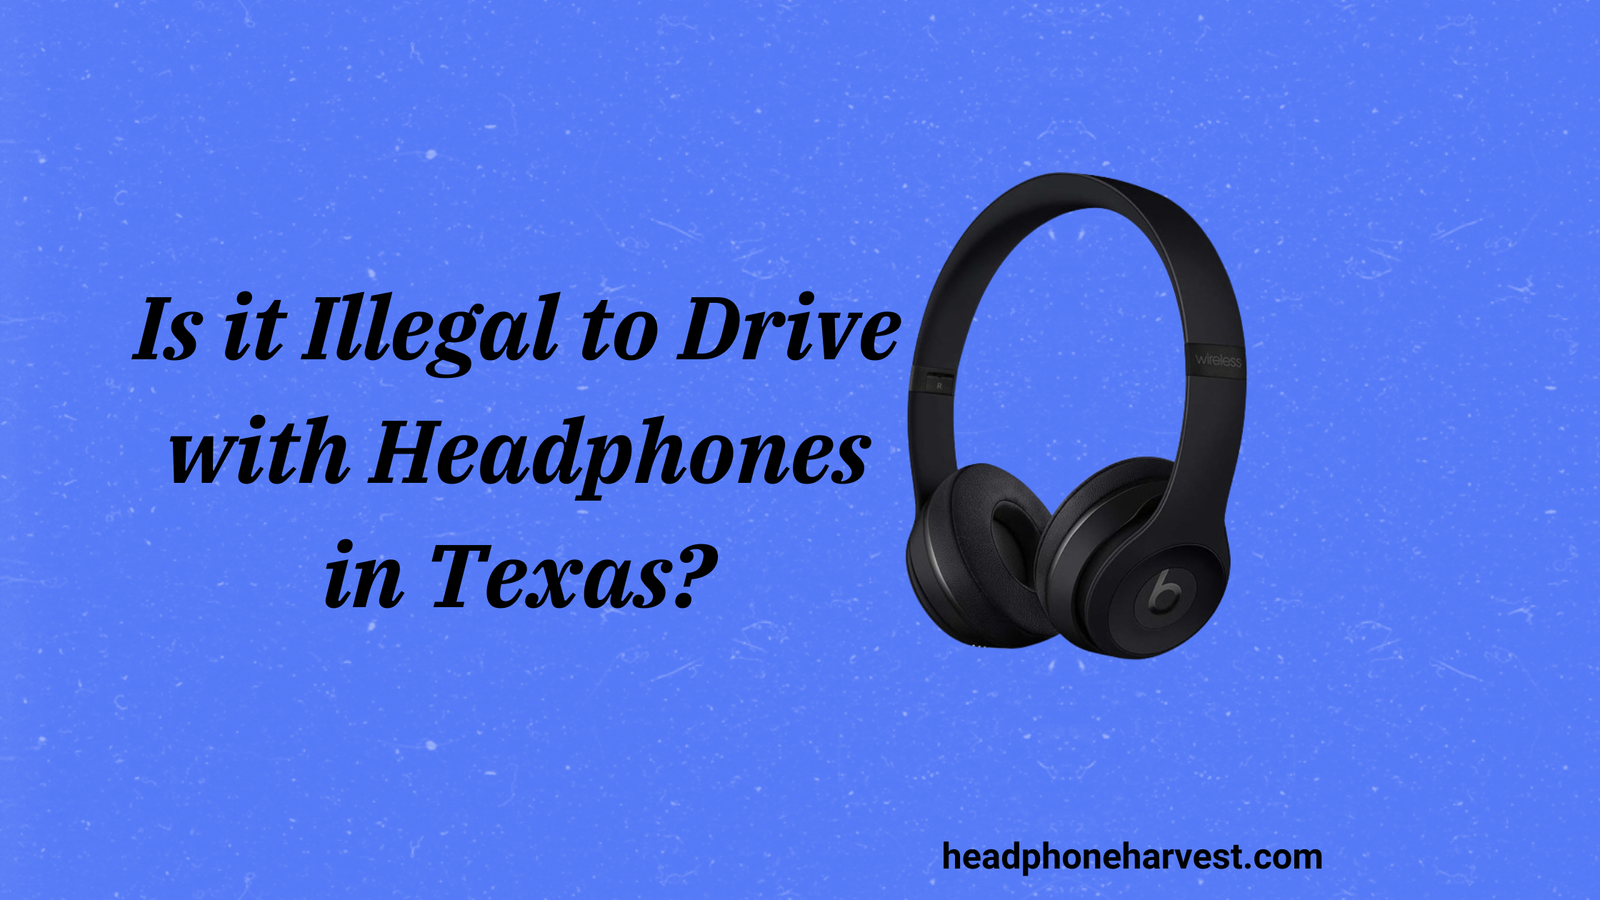 Is it Illegal to Drive with Headphones in Texas?